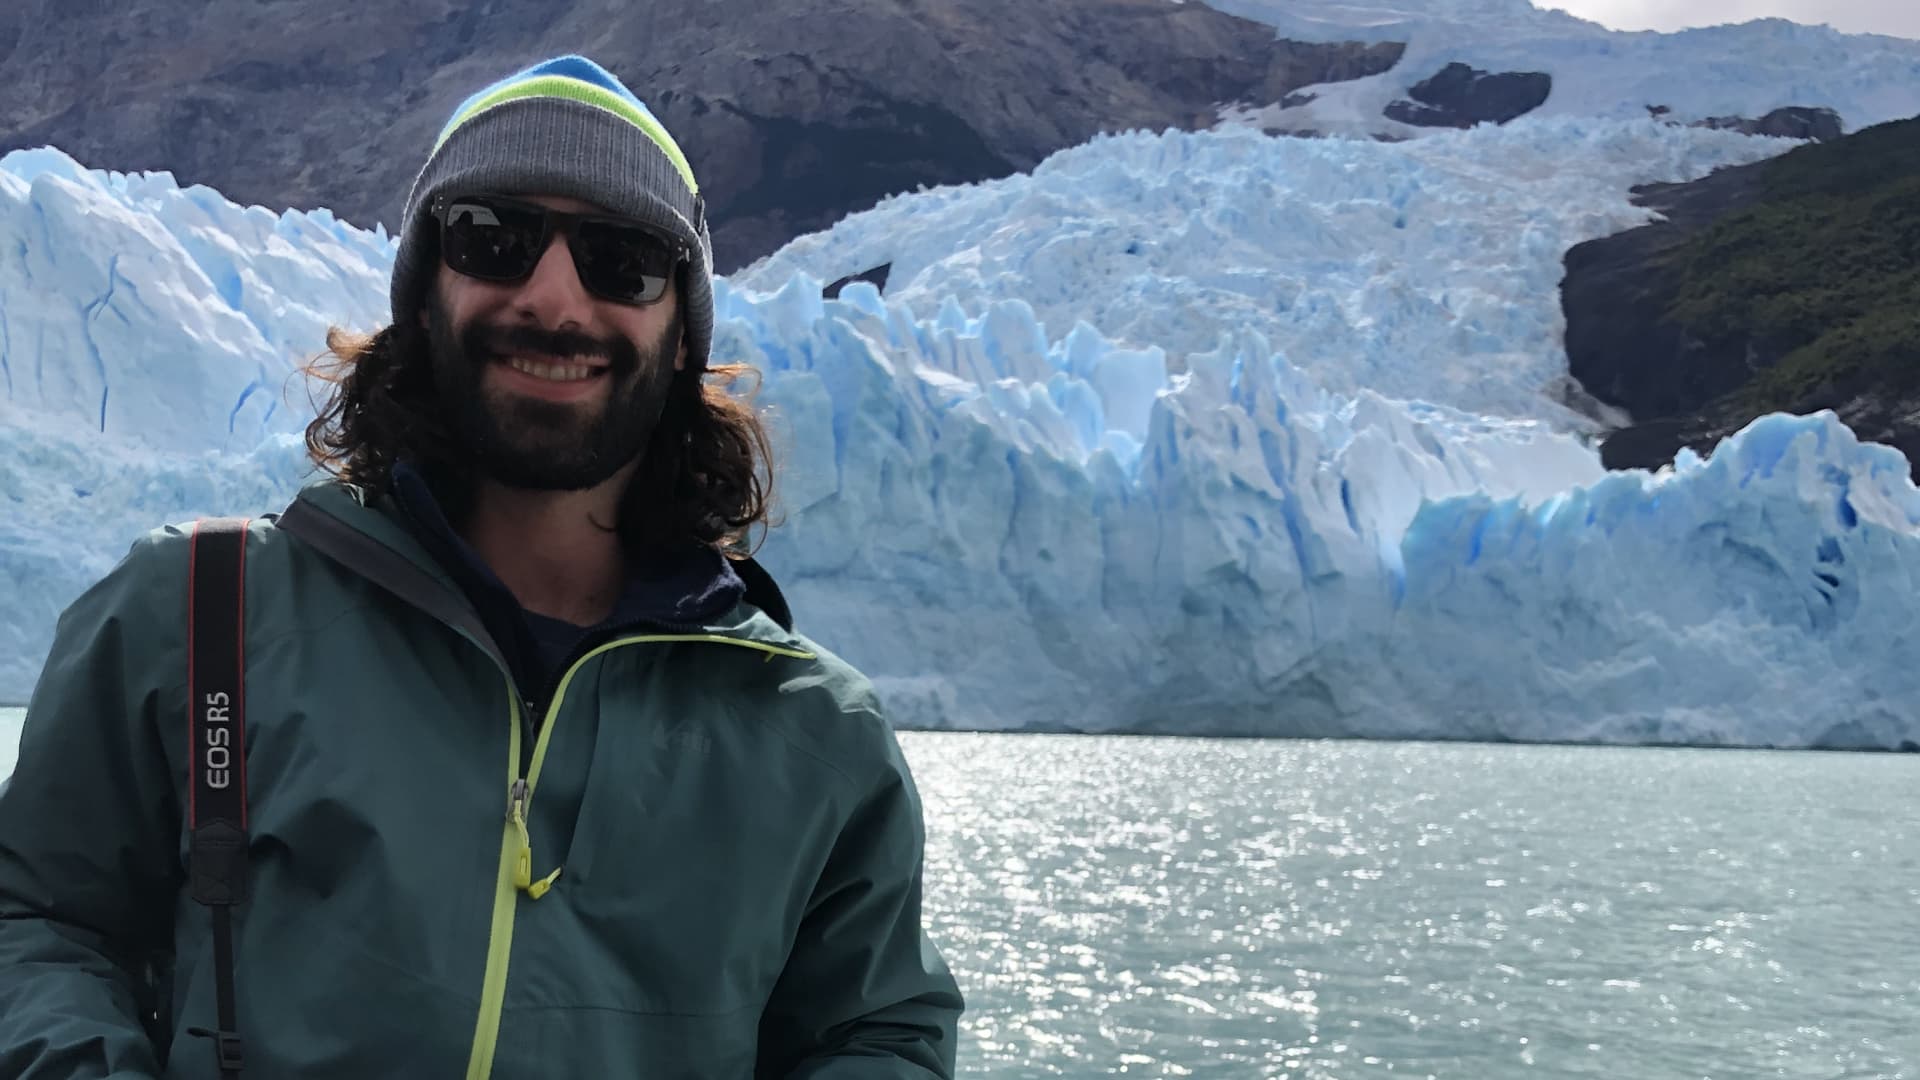 The author in Argentinian Patagonia in February 2023. Here, the Spegazzini Glacier cascades into Lago Argentino, the third largest lake in South America.